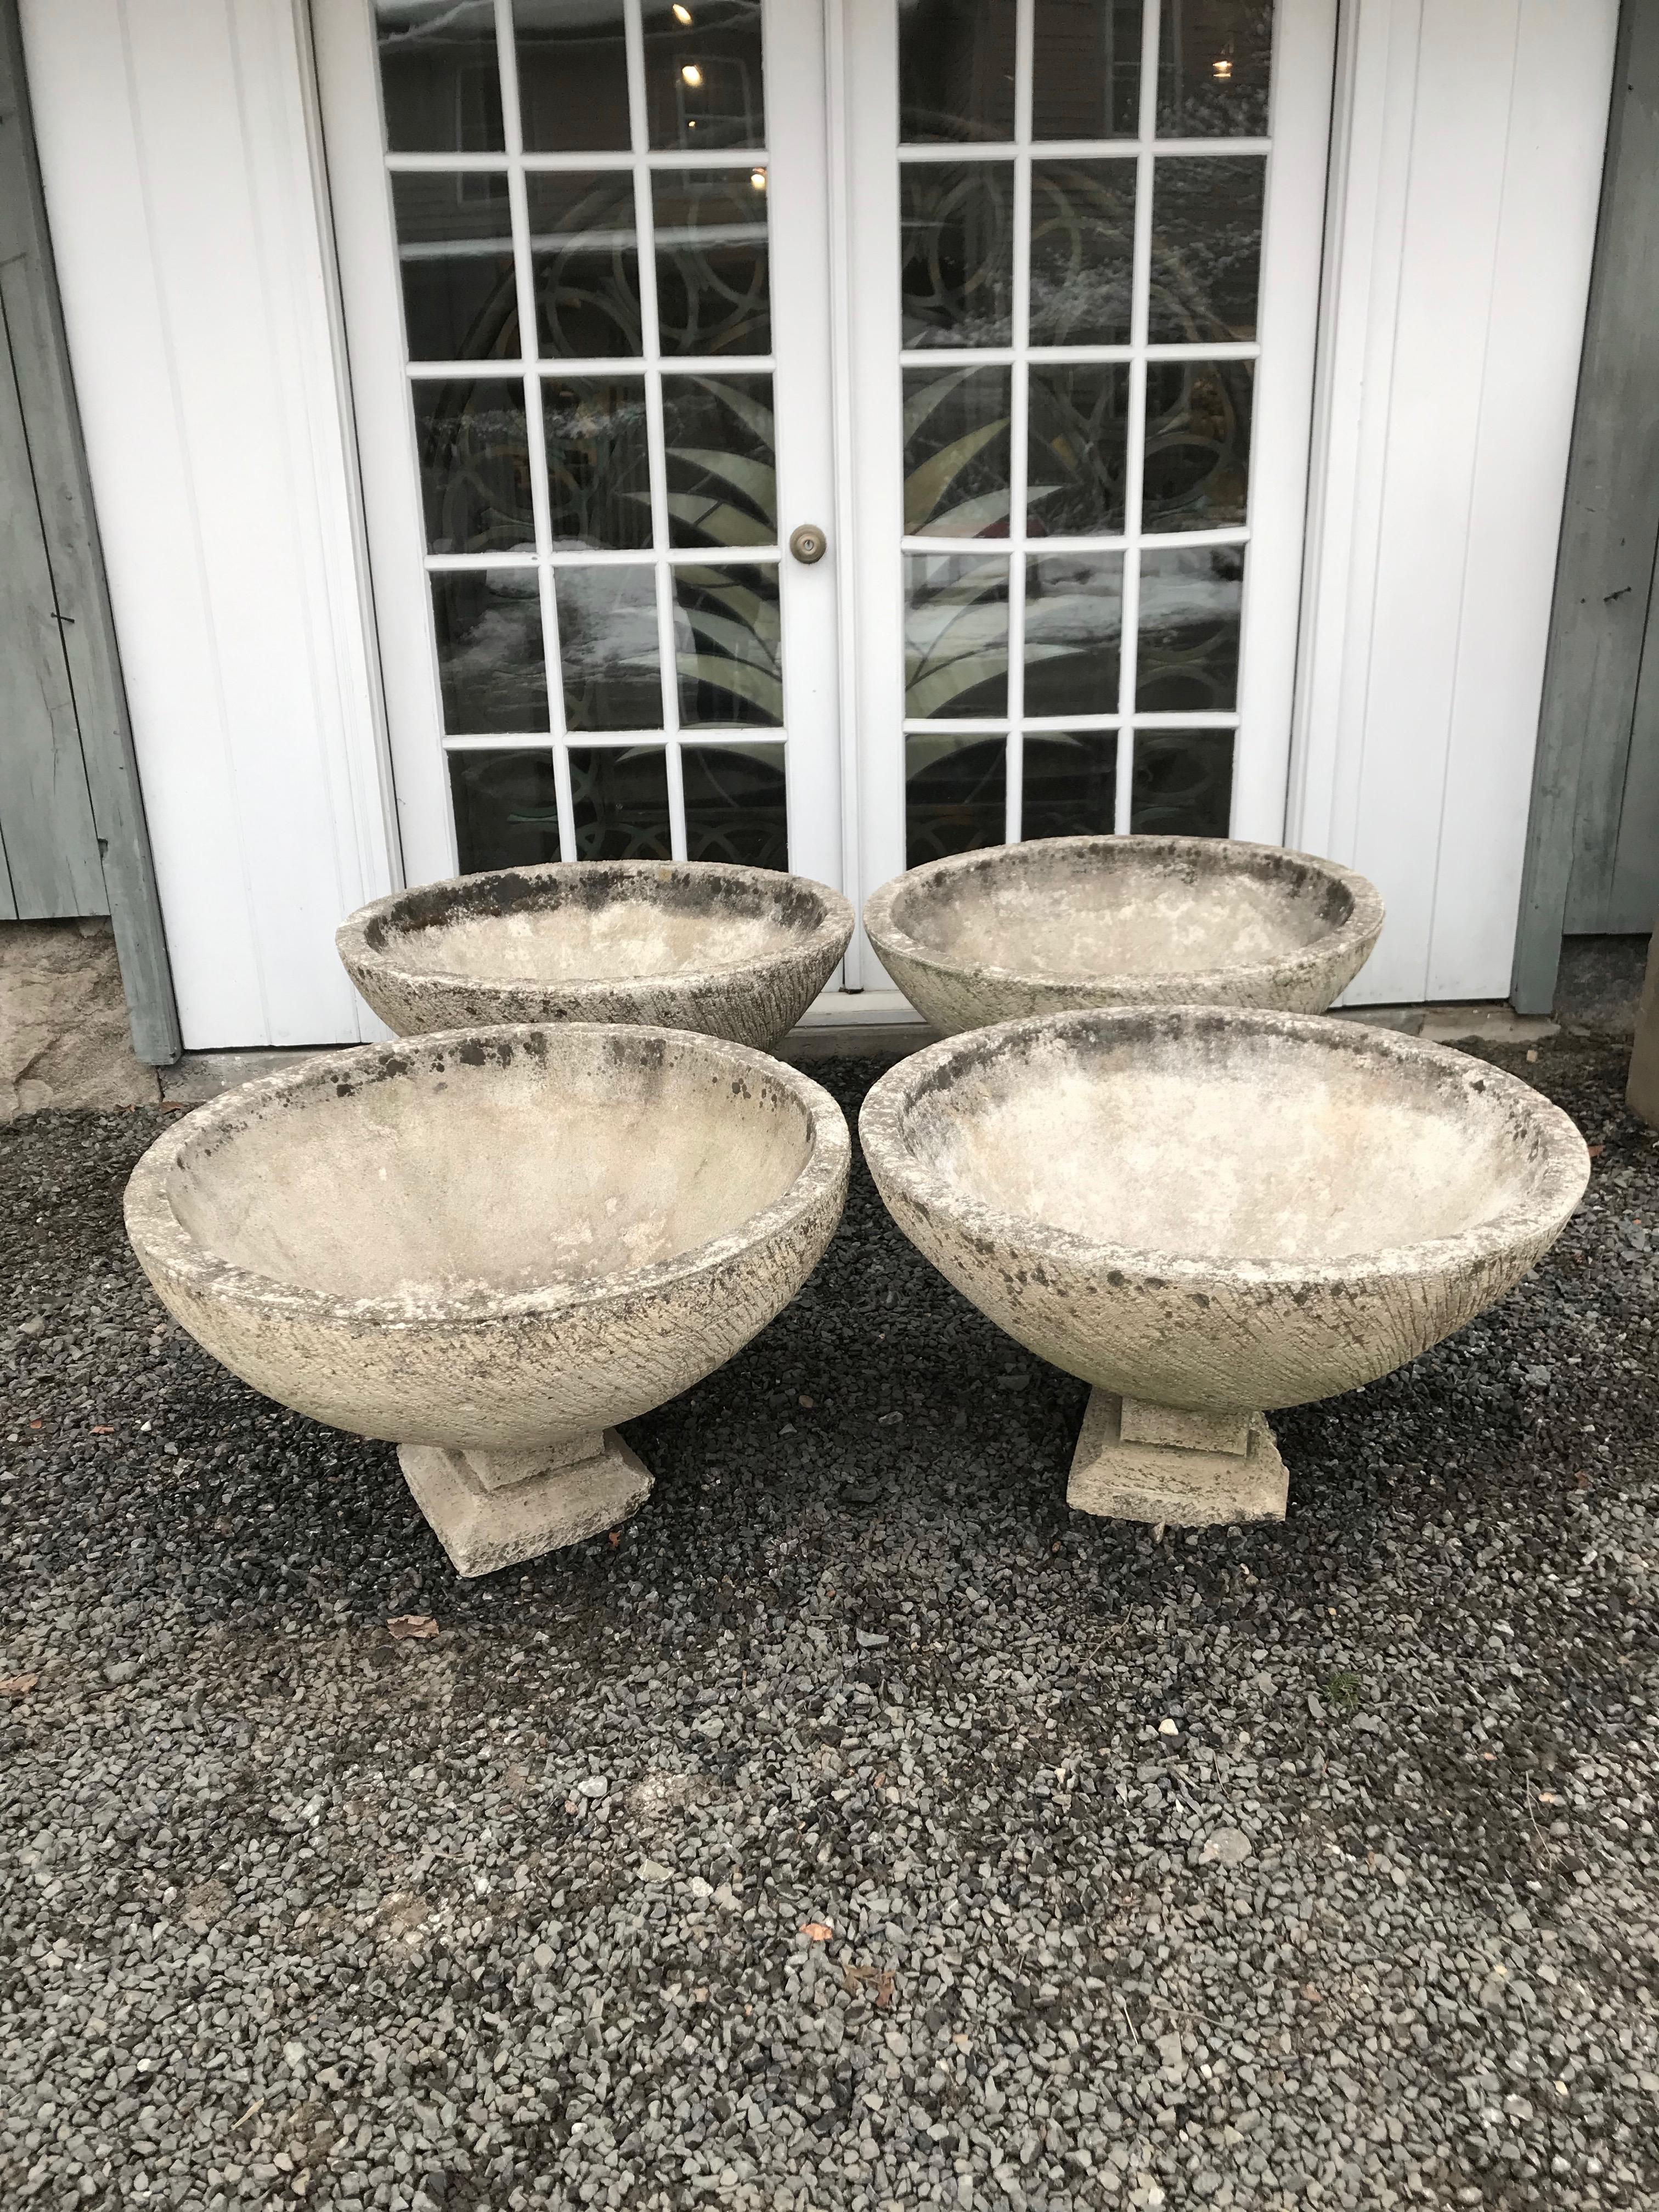 Pair of Large Round French Cast Stone Bowl Planters on Integral Feet #1 8